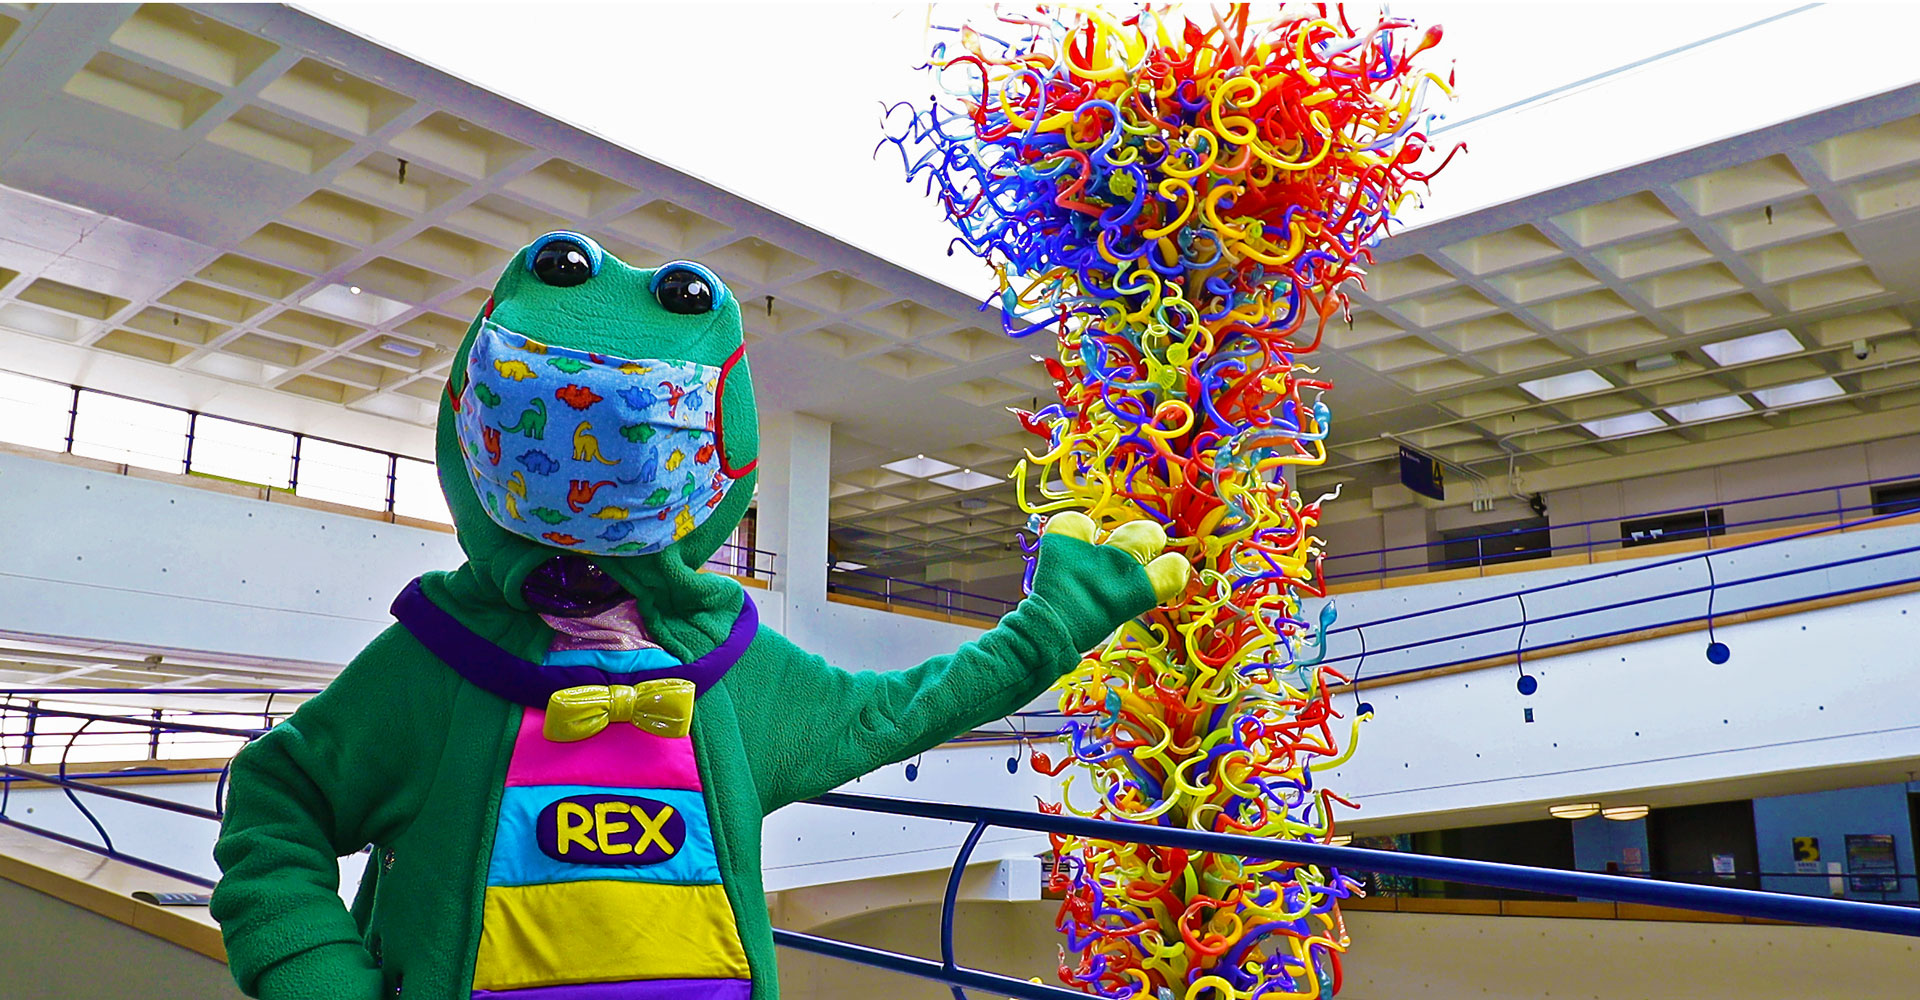 Rex wearing a mask and standing in front of the Chihuly Fireworks of Glass sculpture.